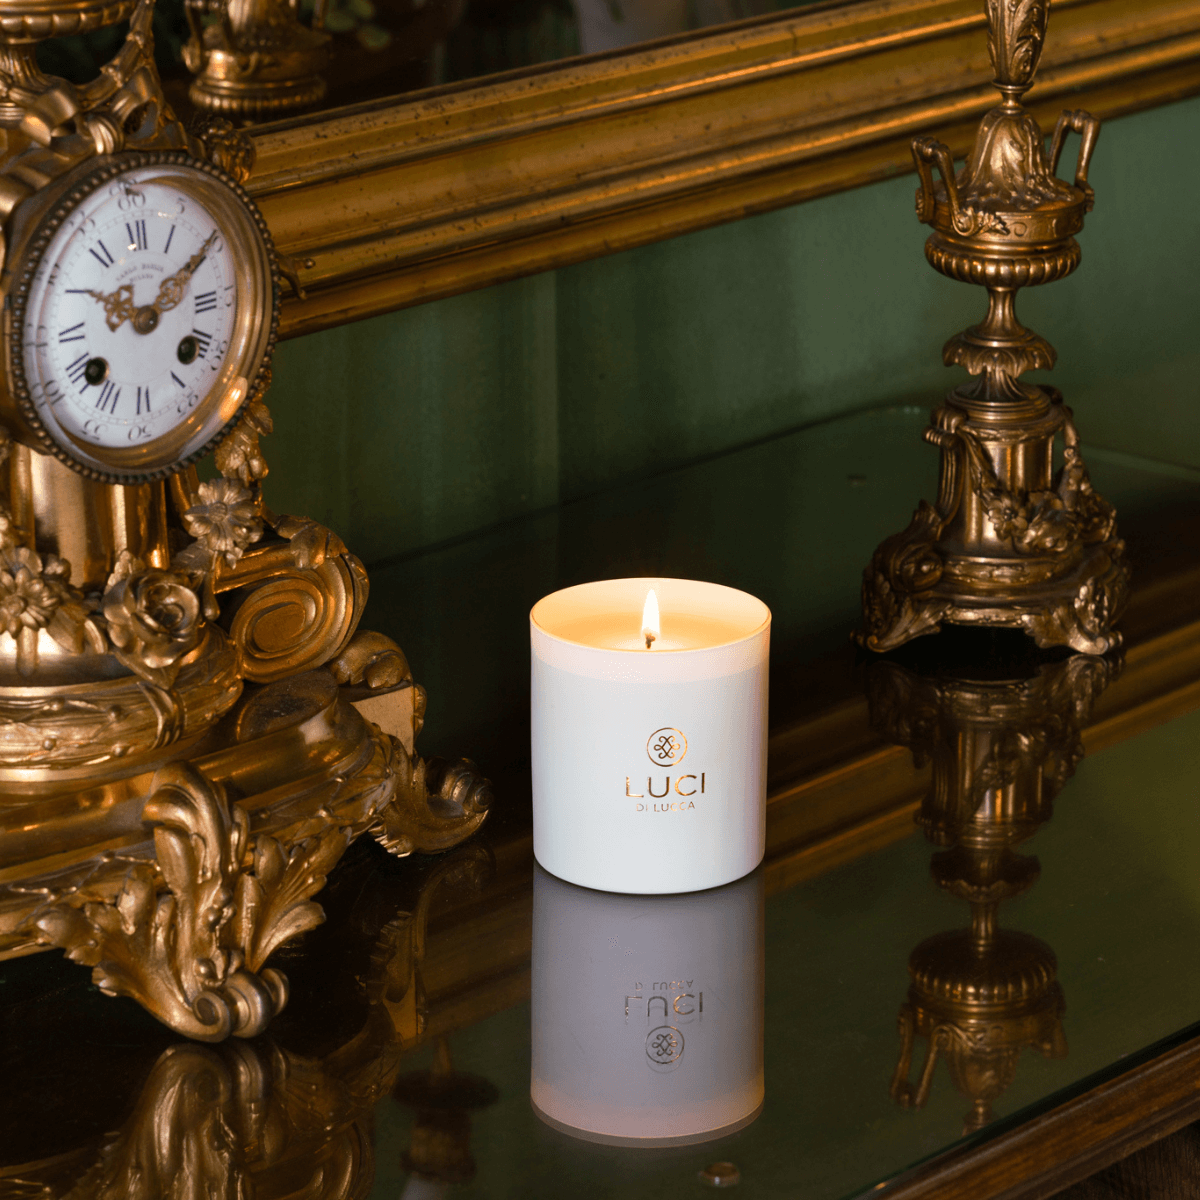 Luxury Scented Italian Candles 275g & 55g - Hand Made at Villa Grabau